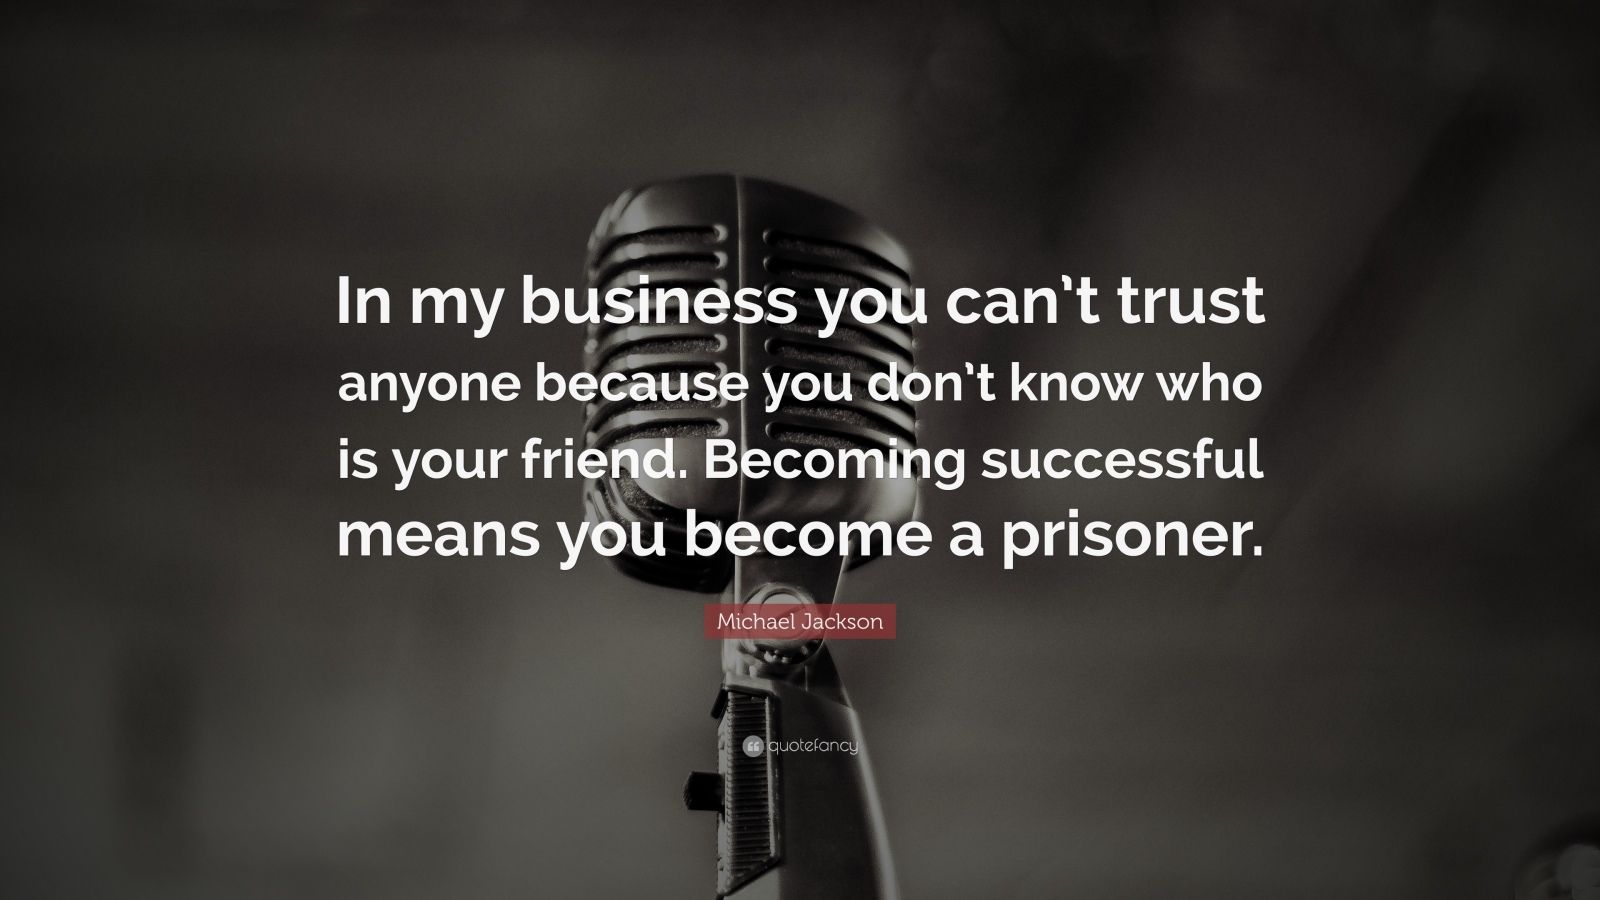 Michael Jackson Quote: “In my business you can't trust anyone ...